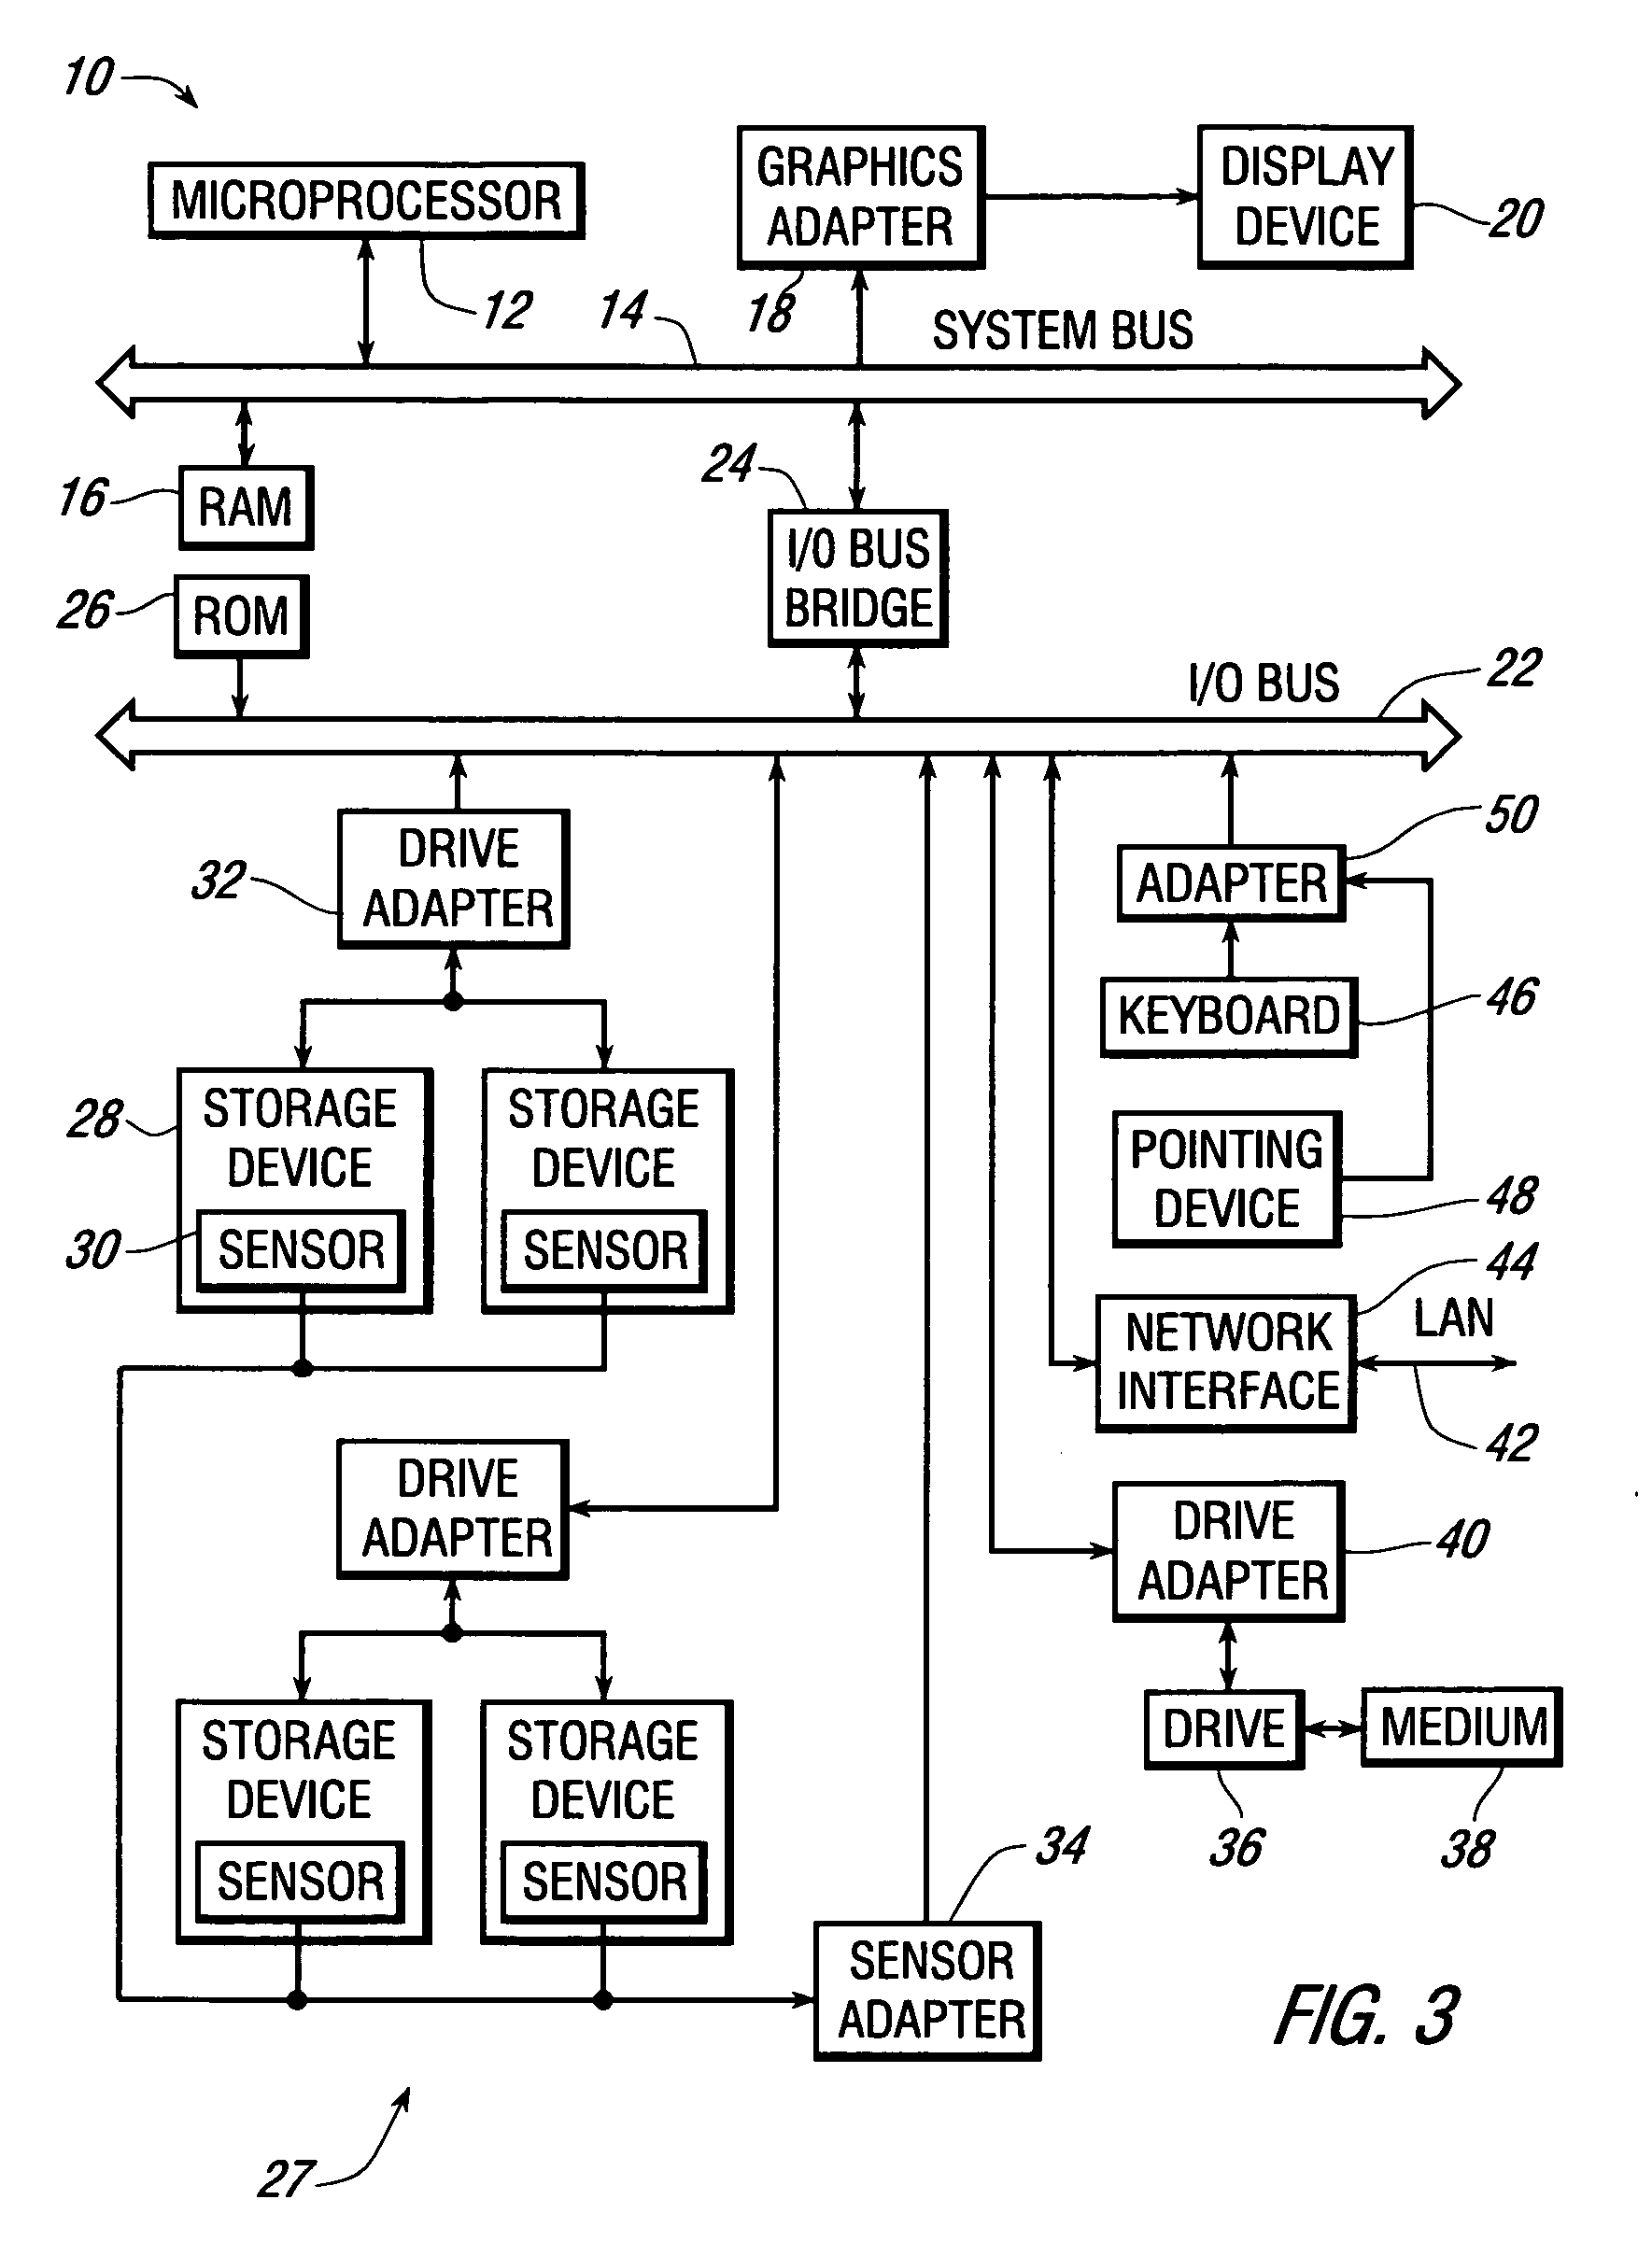 Apparatus and method for achieving thermal management through the allocation of redundant data processing devices